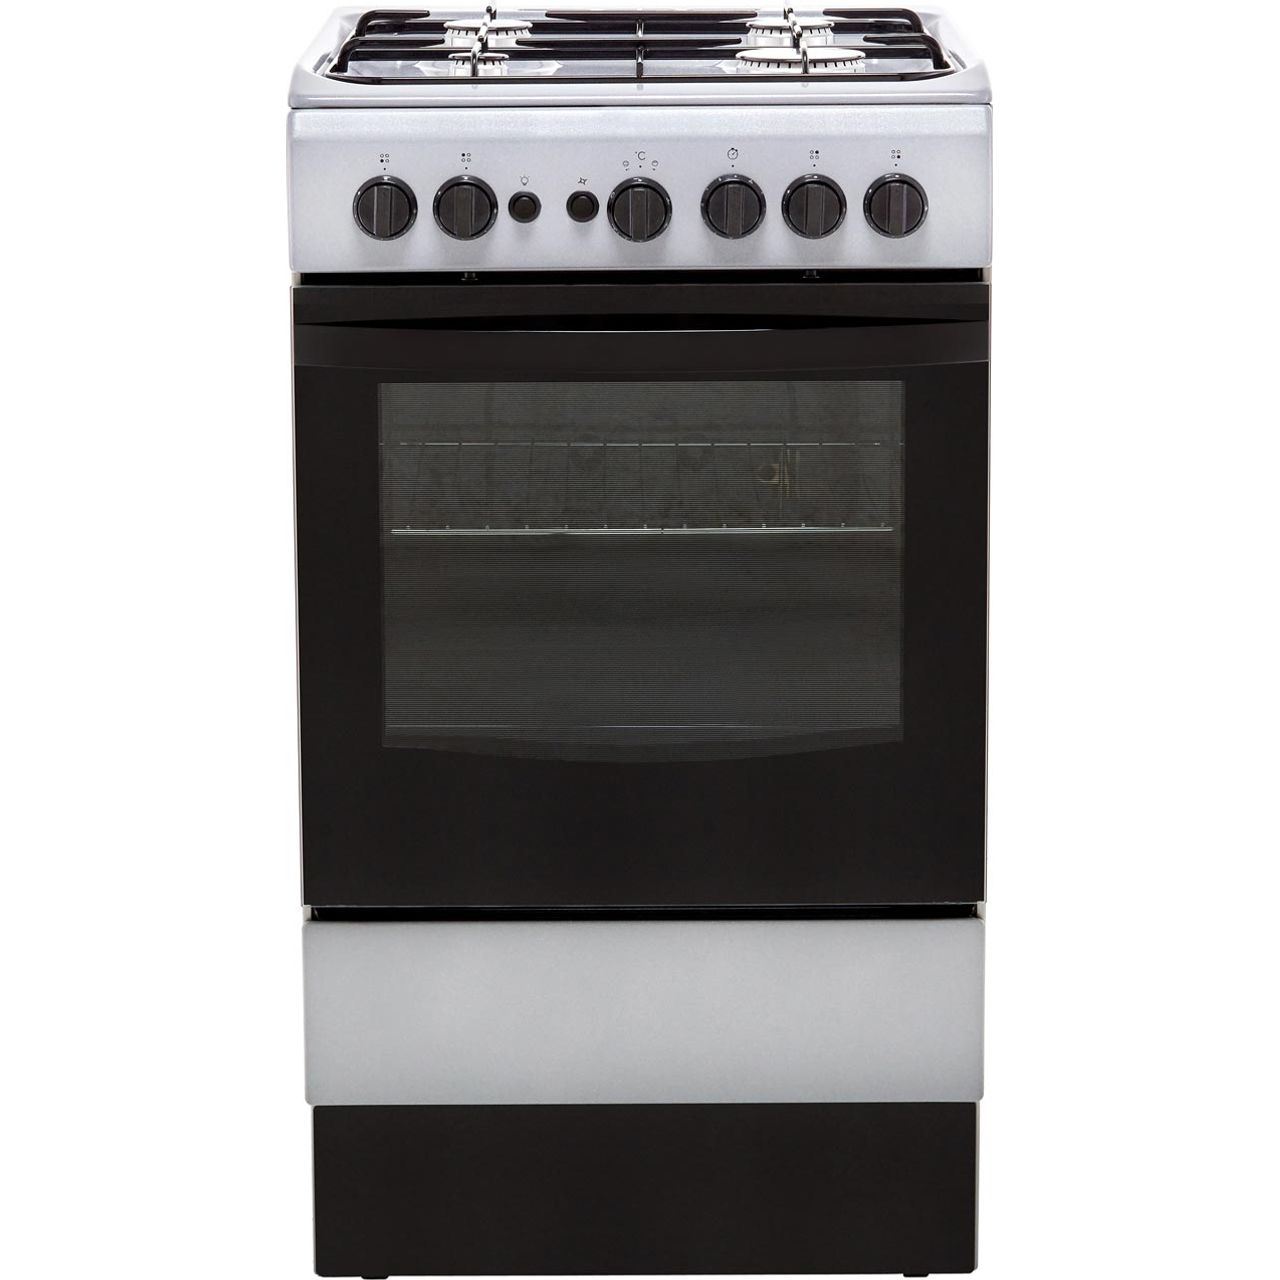 Indesit Cloe IS5G1PMSS 50cm Gas Cooker Review